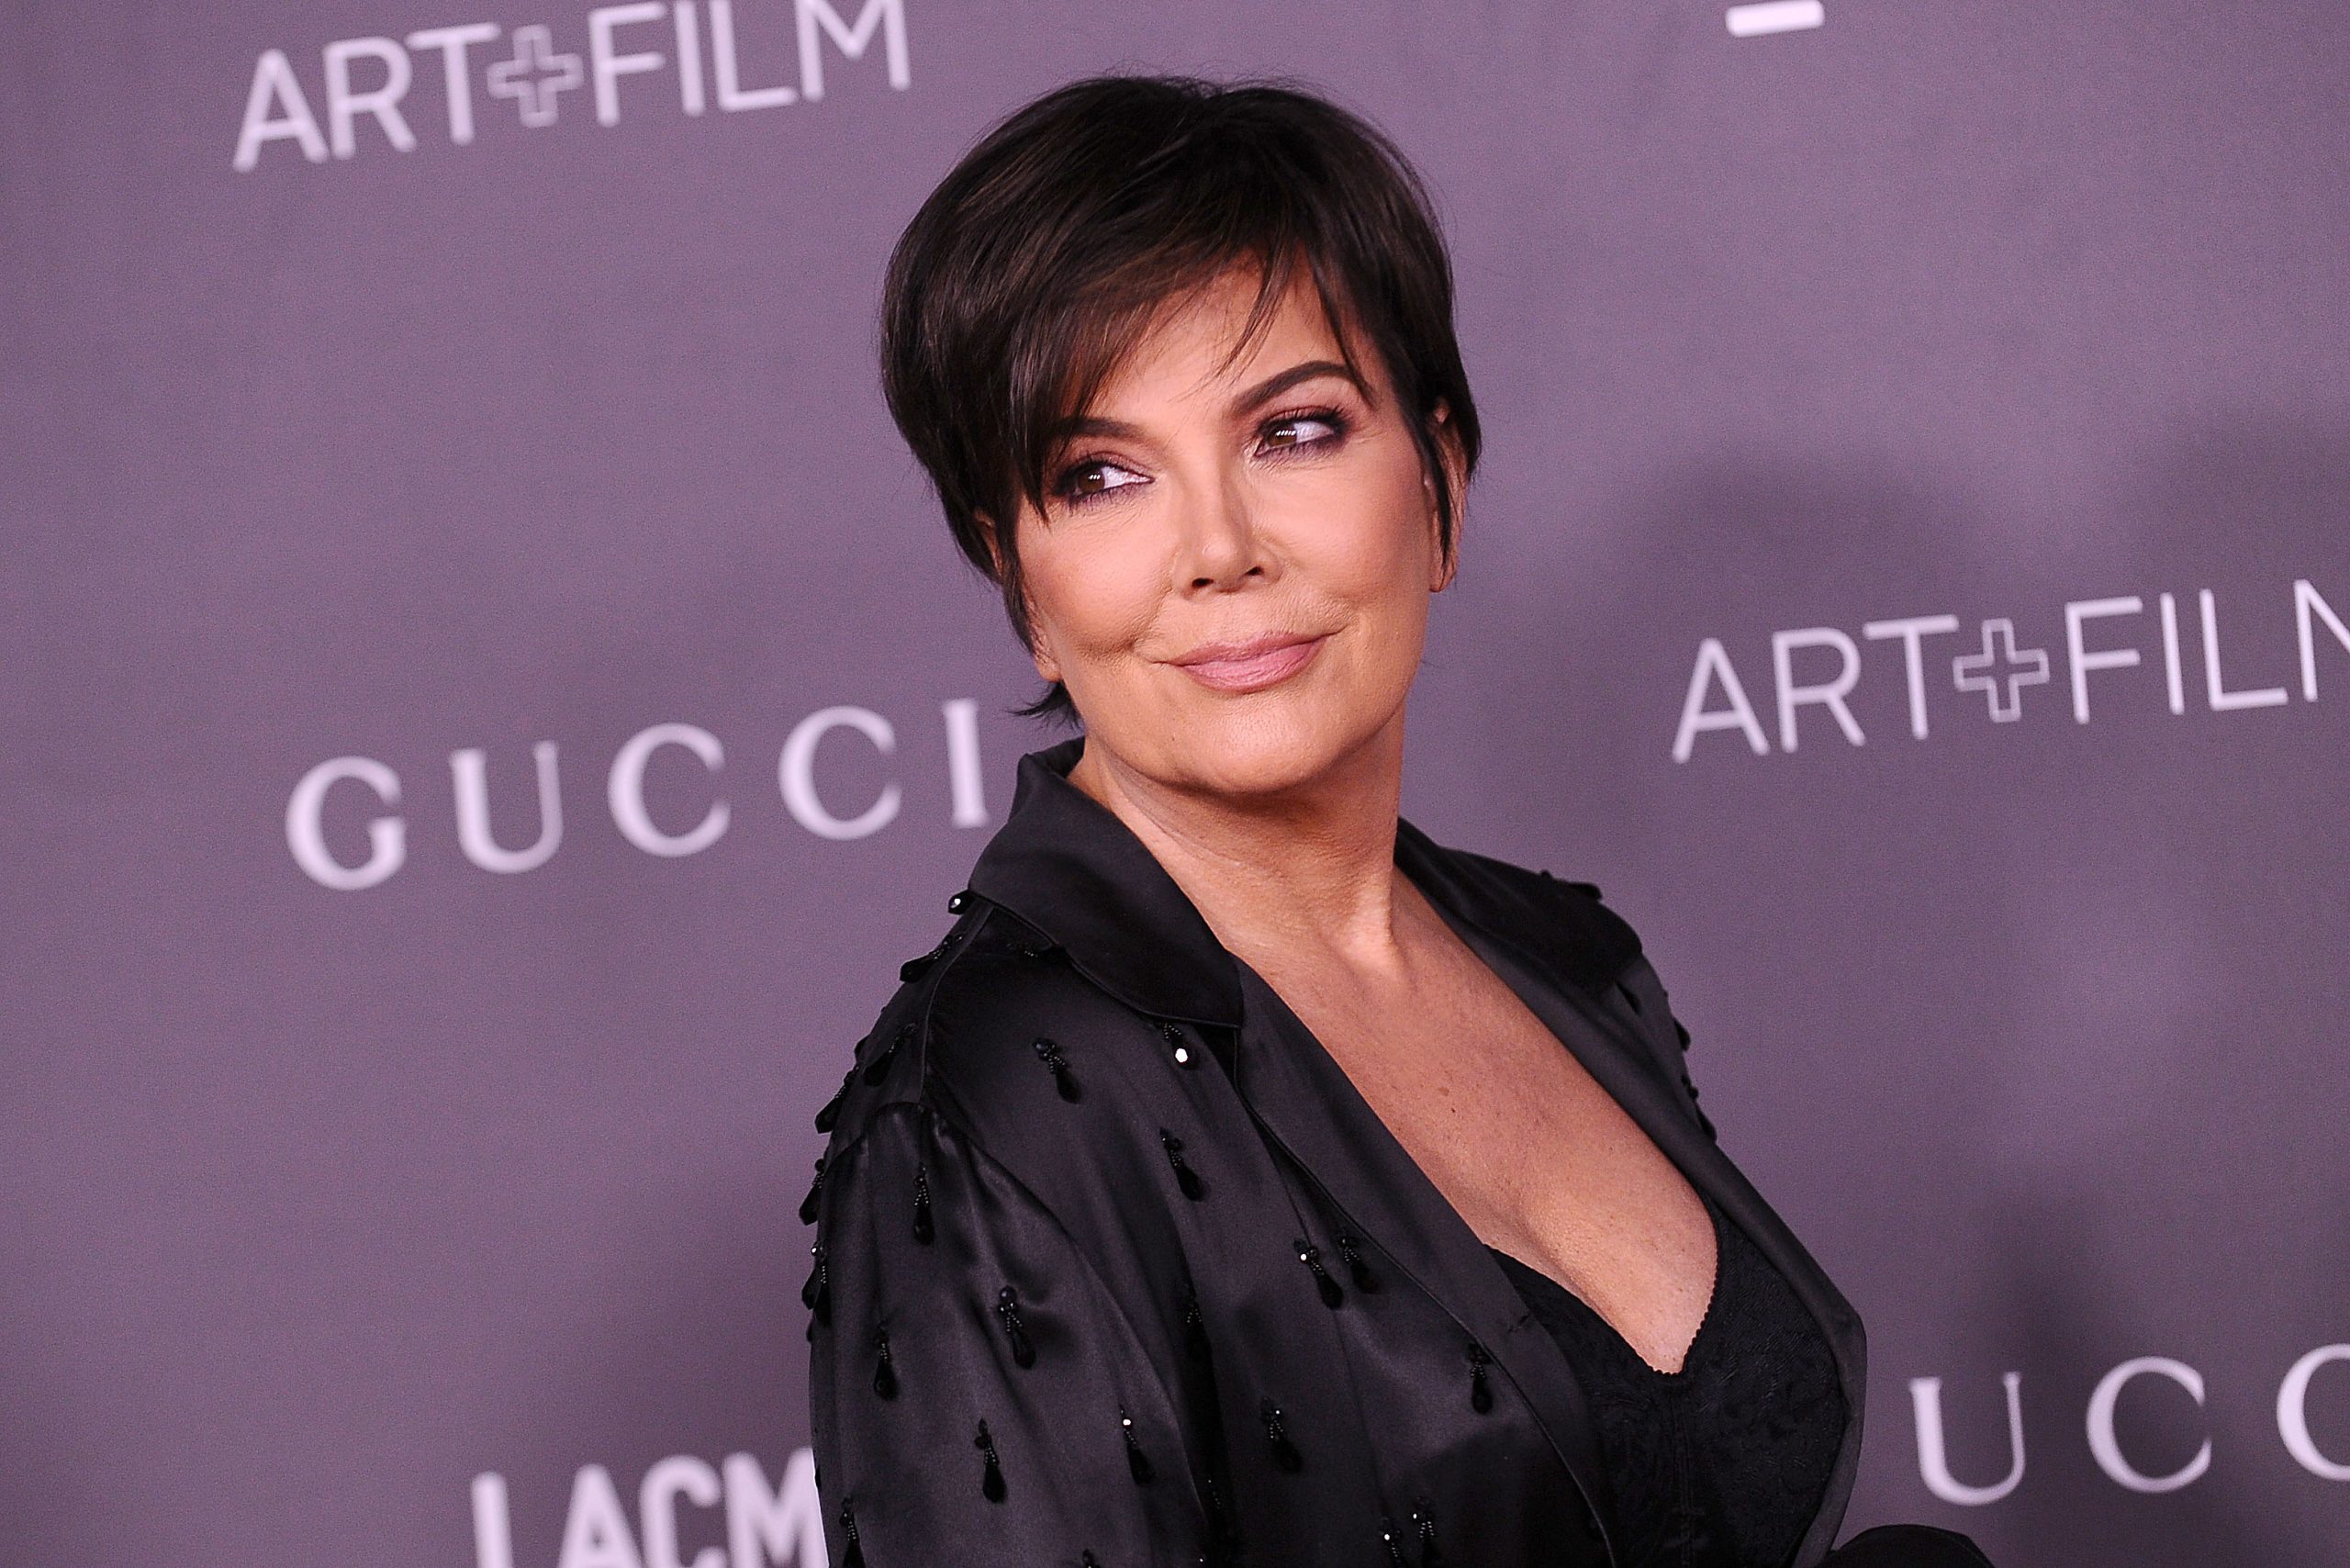 Kris Jenner Poses For A Photo On The Red Carpet At The LACMA Art Film Gala Scaled 